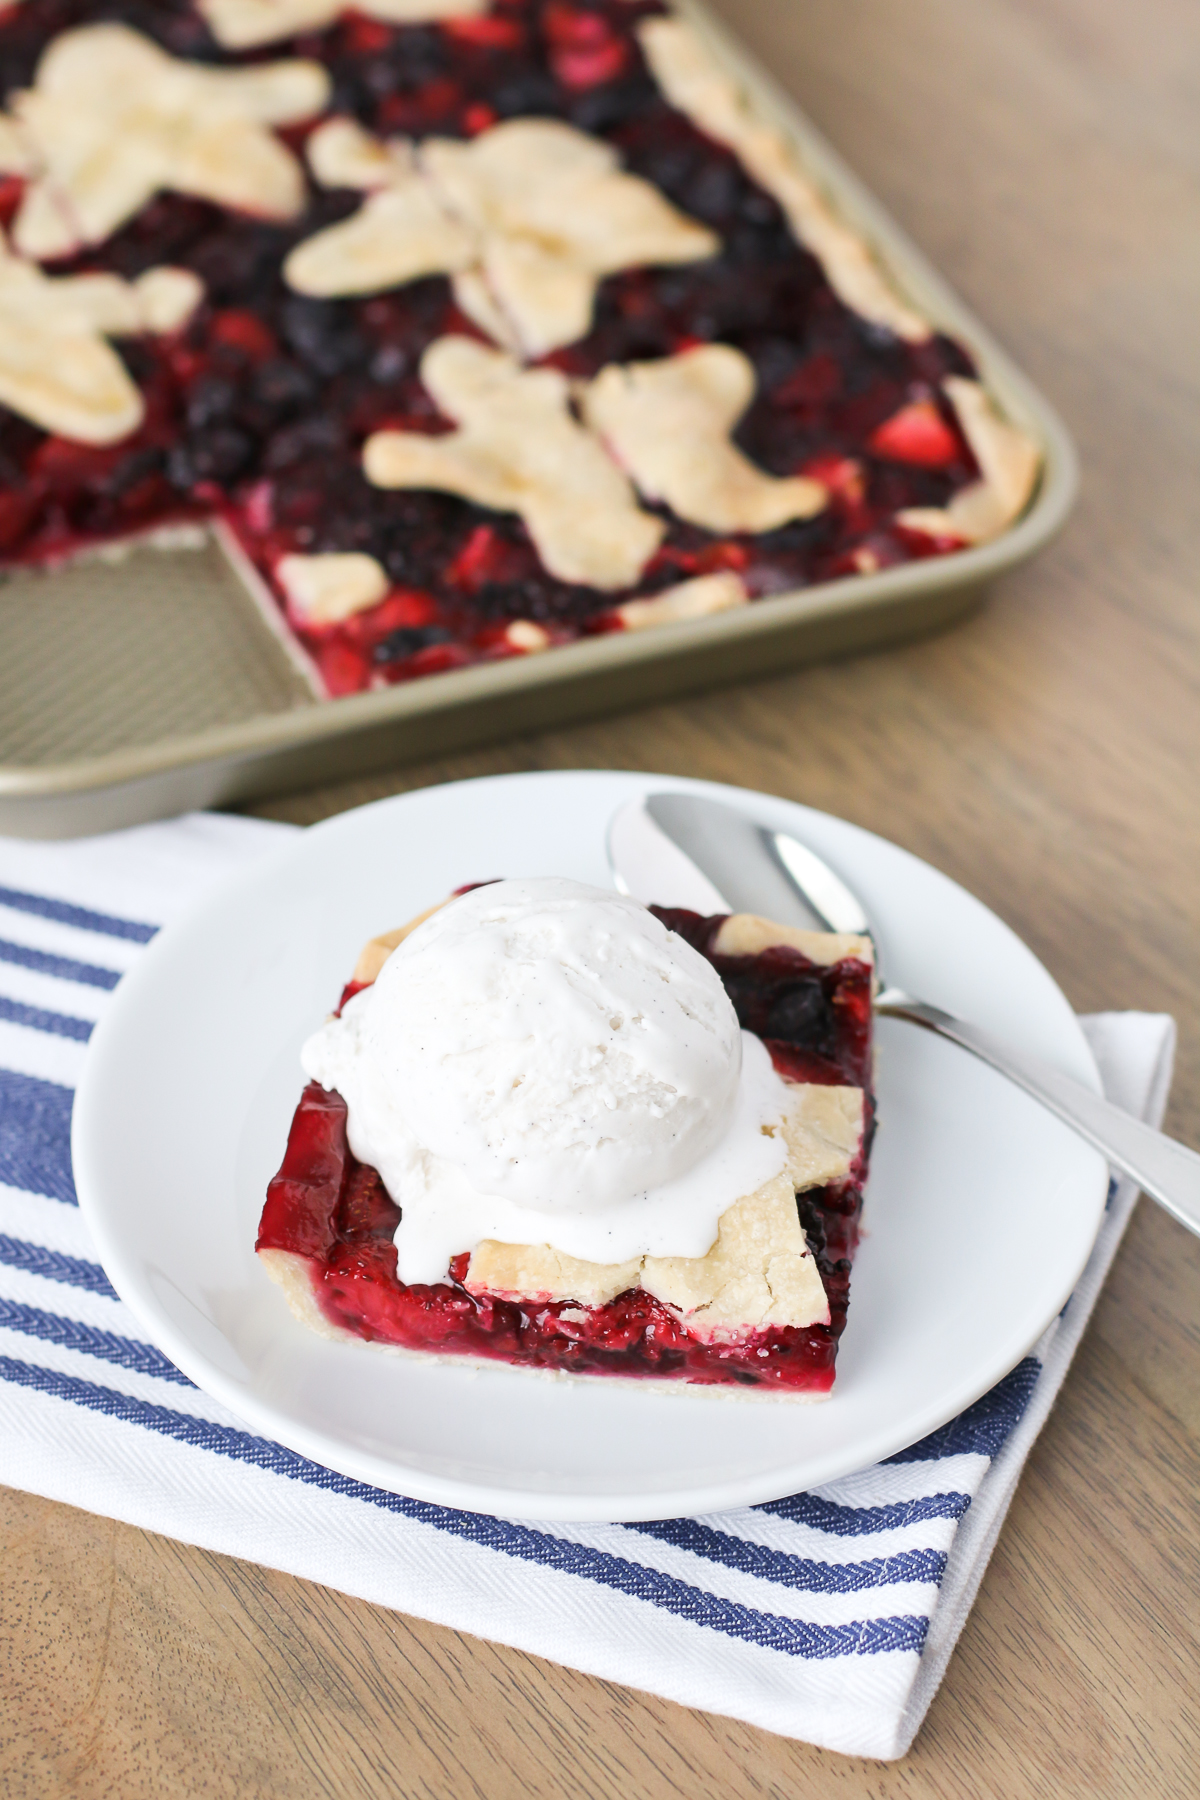 Gluten Free Vegan Triple Berry Slab Pie. Flaky pie crust, filled with fresh strawberries, blueberries and blackberries. Baked in a sheet pan until bubbly and golden brown!